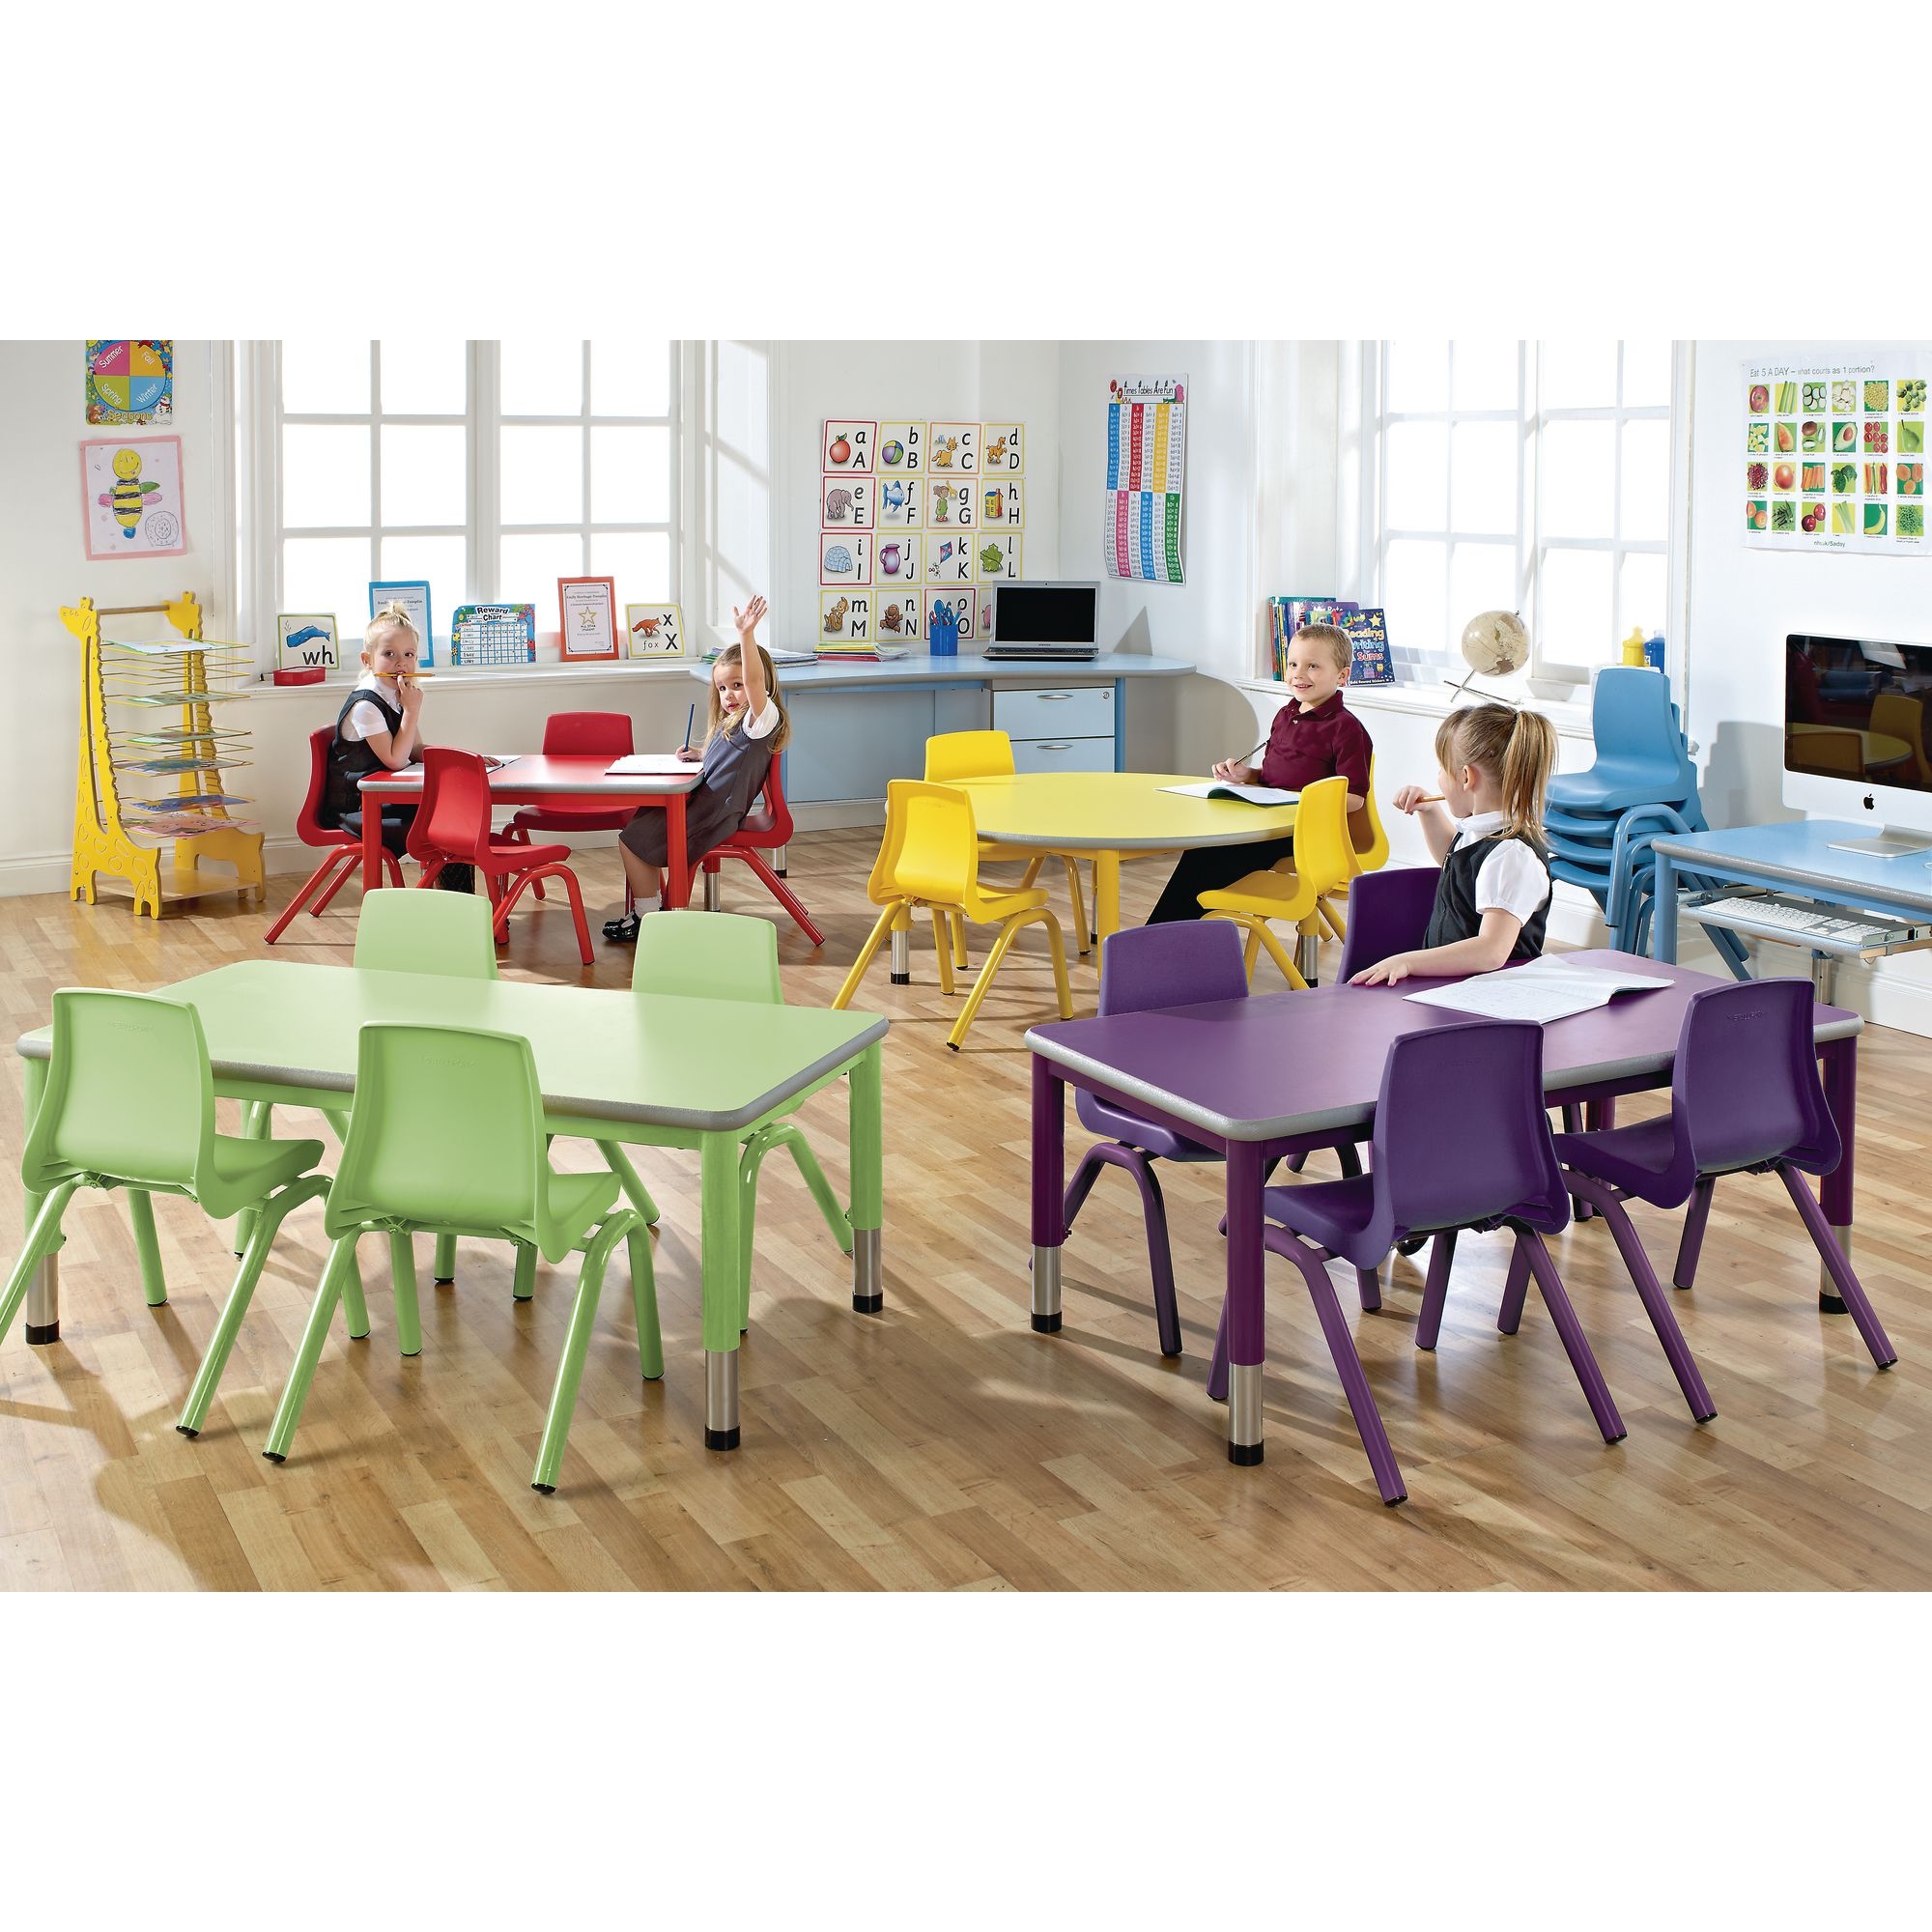 Harlequin Rectangular Height Adjustable Steel Classroom Pack: Table and 4 Chairs - 900 x 600 x 400mm - Tangy Lime